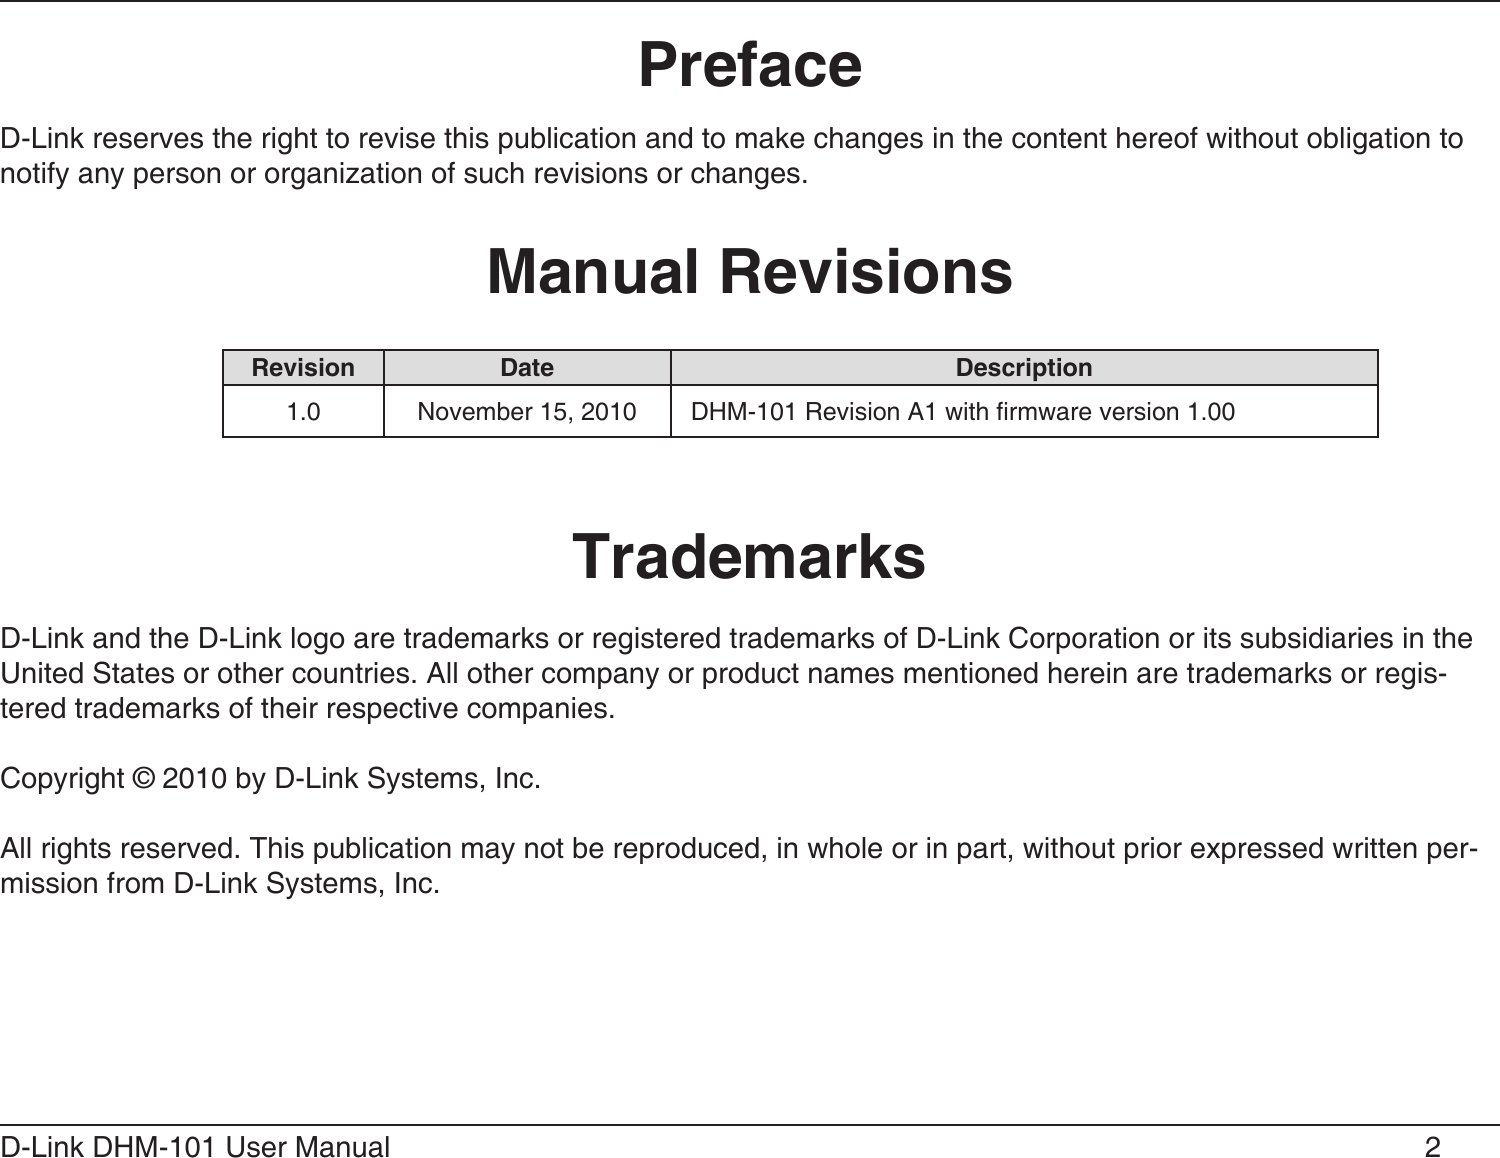 2D-Link DHM-101 User Manual D-Link reserves the right to revise this publication and to make changes in the content hereof without obligation to notify any person or organization of such revisions or changes.D-Link and the D-Link logo are trademarks or registered trademarks of D-Link Corporation or its subsidiaries in the United States or other countries. All other company or product names mentioned herein are trademarks or regis-tered trademarks of their respective companies.Copyright © 2010 by D-Link Systems, Inc.All rights reserved. This publication may not be reproduced, in whole or in part, without prior expressed written per-mission from D-Link Systems, Inc.  1.0 November 15, 2010 DHM-101 Revision A1 with rmware version 1.00